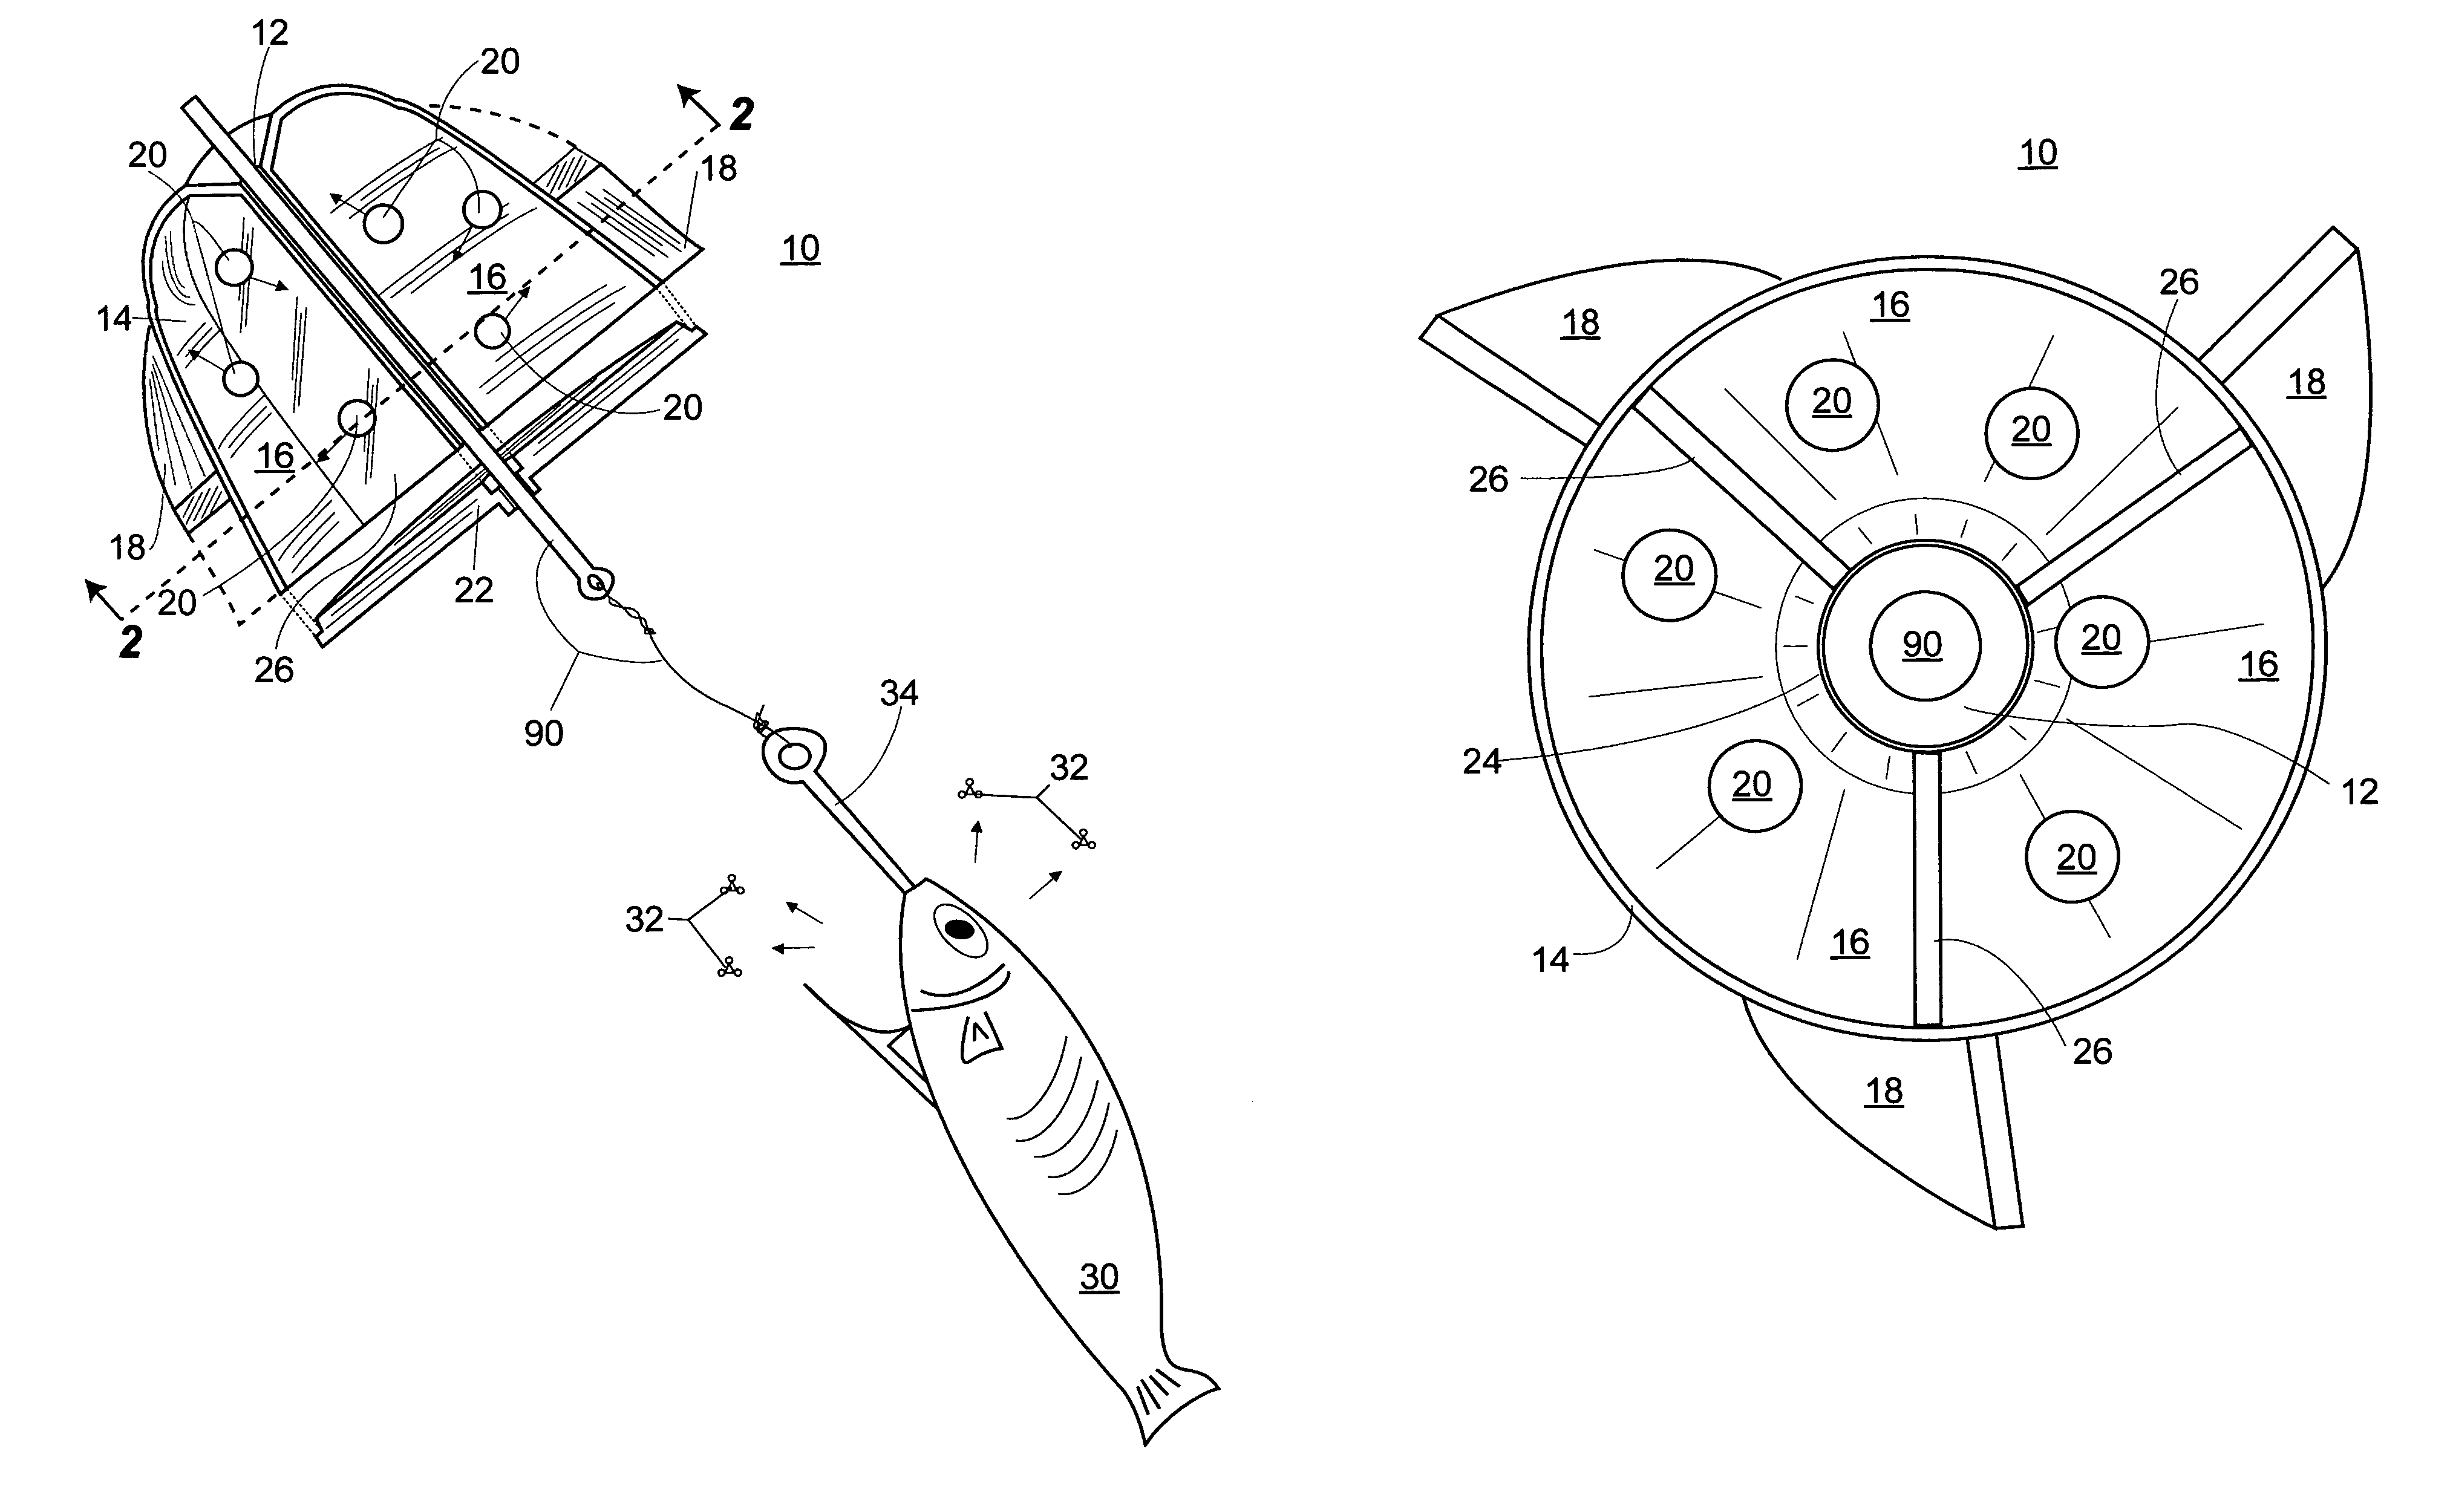 Fishing bait rig attachment apparatus with rotating rattle